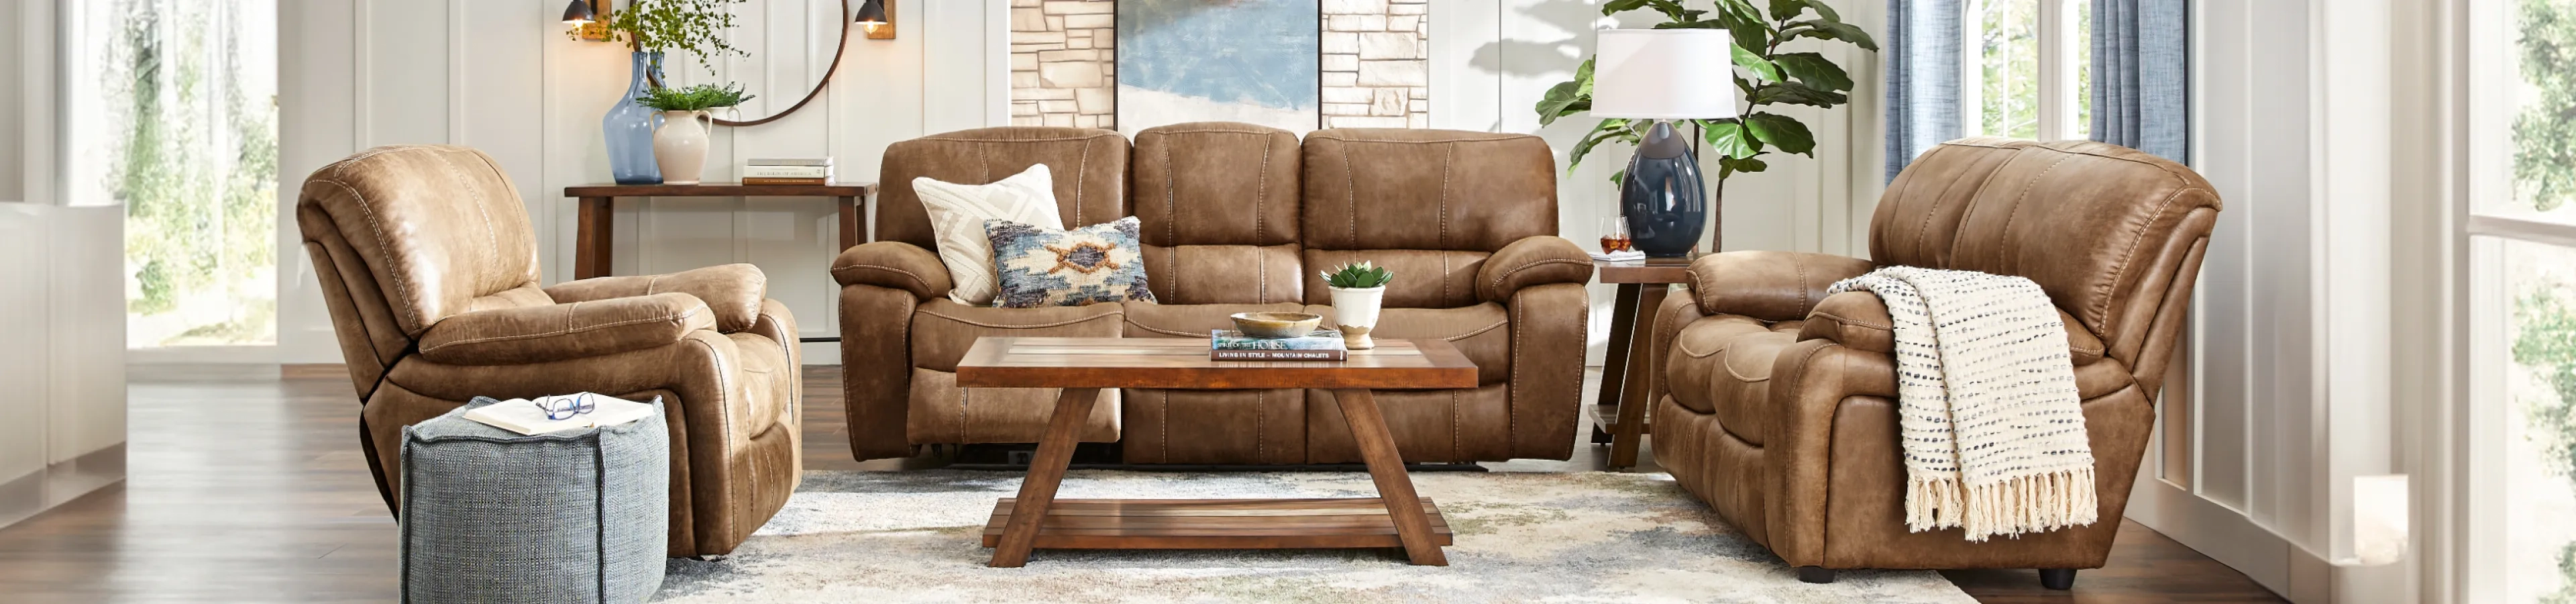 brown leather couches